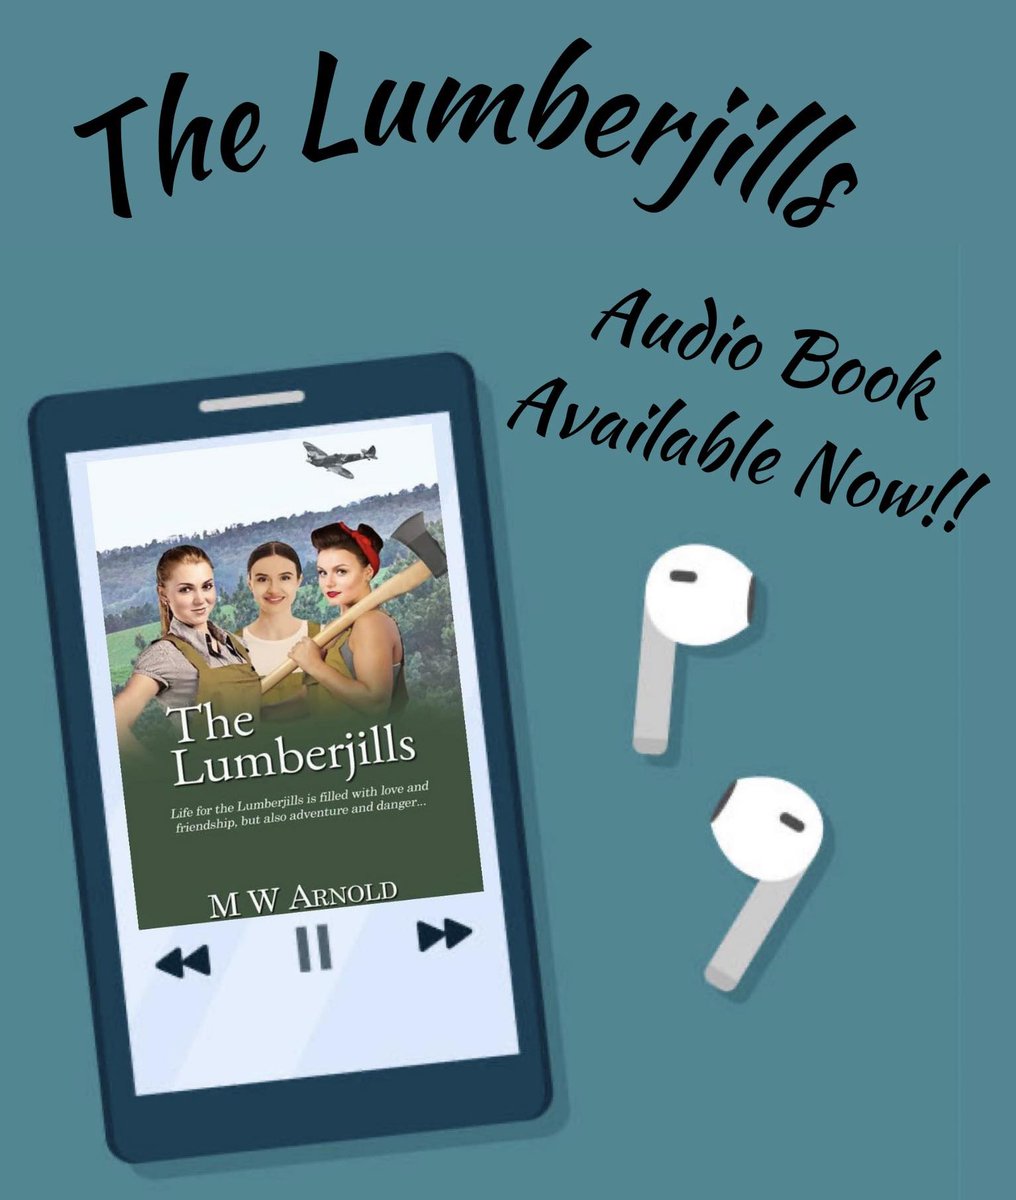 This author has a brilliant way of sharing Information about past times with caring. Review of ‘The Lumberjills’ by Splashes Into Books @bicted mybook.to/TLJ1 @WildRosePress #Historical #mystery #Romance #BookTwitter #BookBoost #Audiobook @UlverscroftLtd @Isisaudio